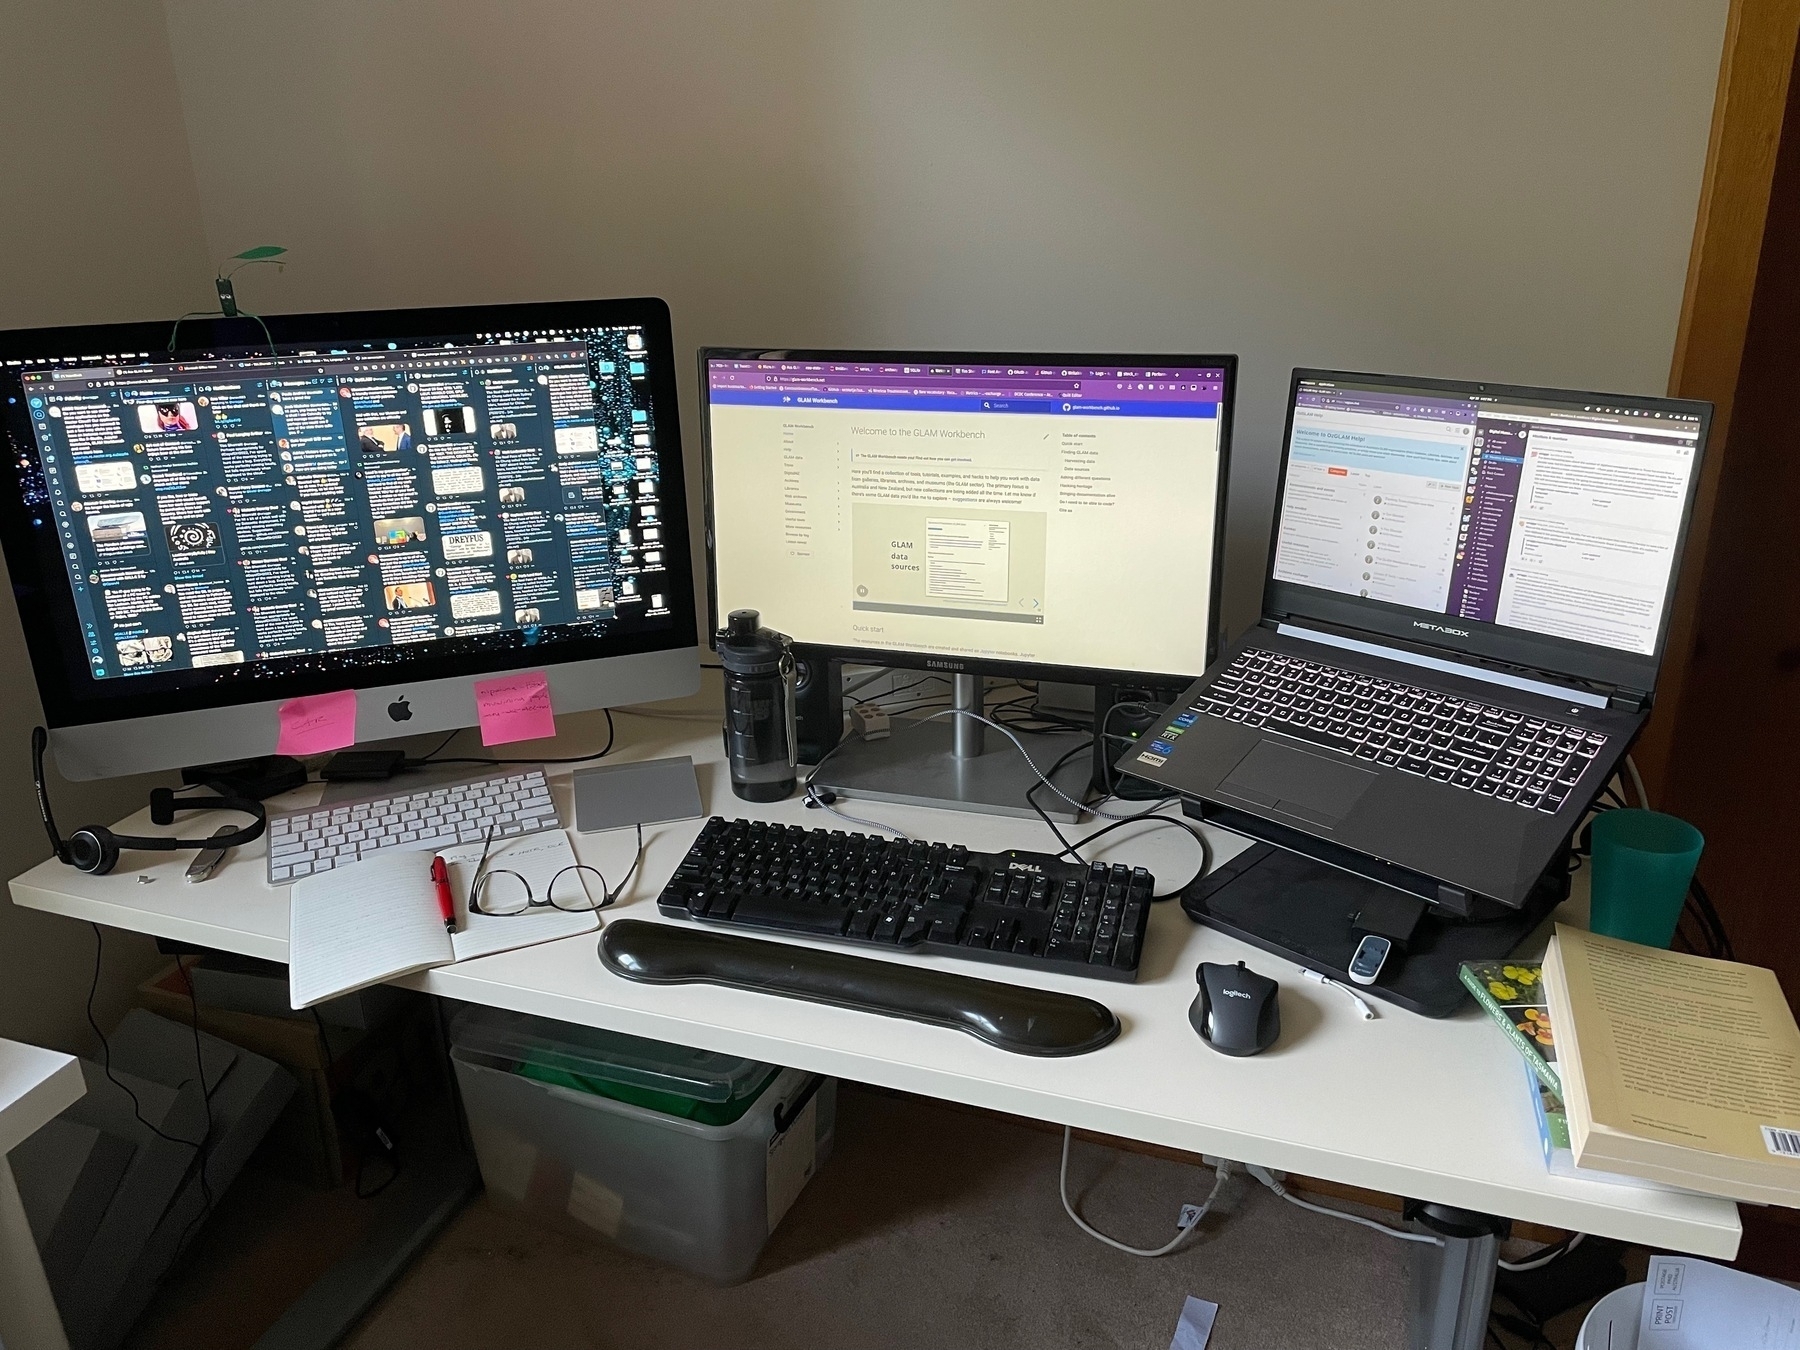 Photograph of my desktop. There are three monitors - one iMac, and a laptop on a stand connected to an external monitor. In the foreground are my distance glasses and a notebook.